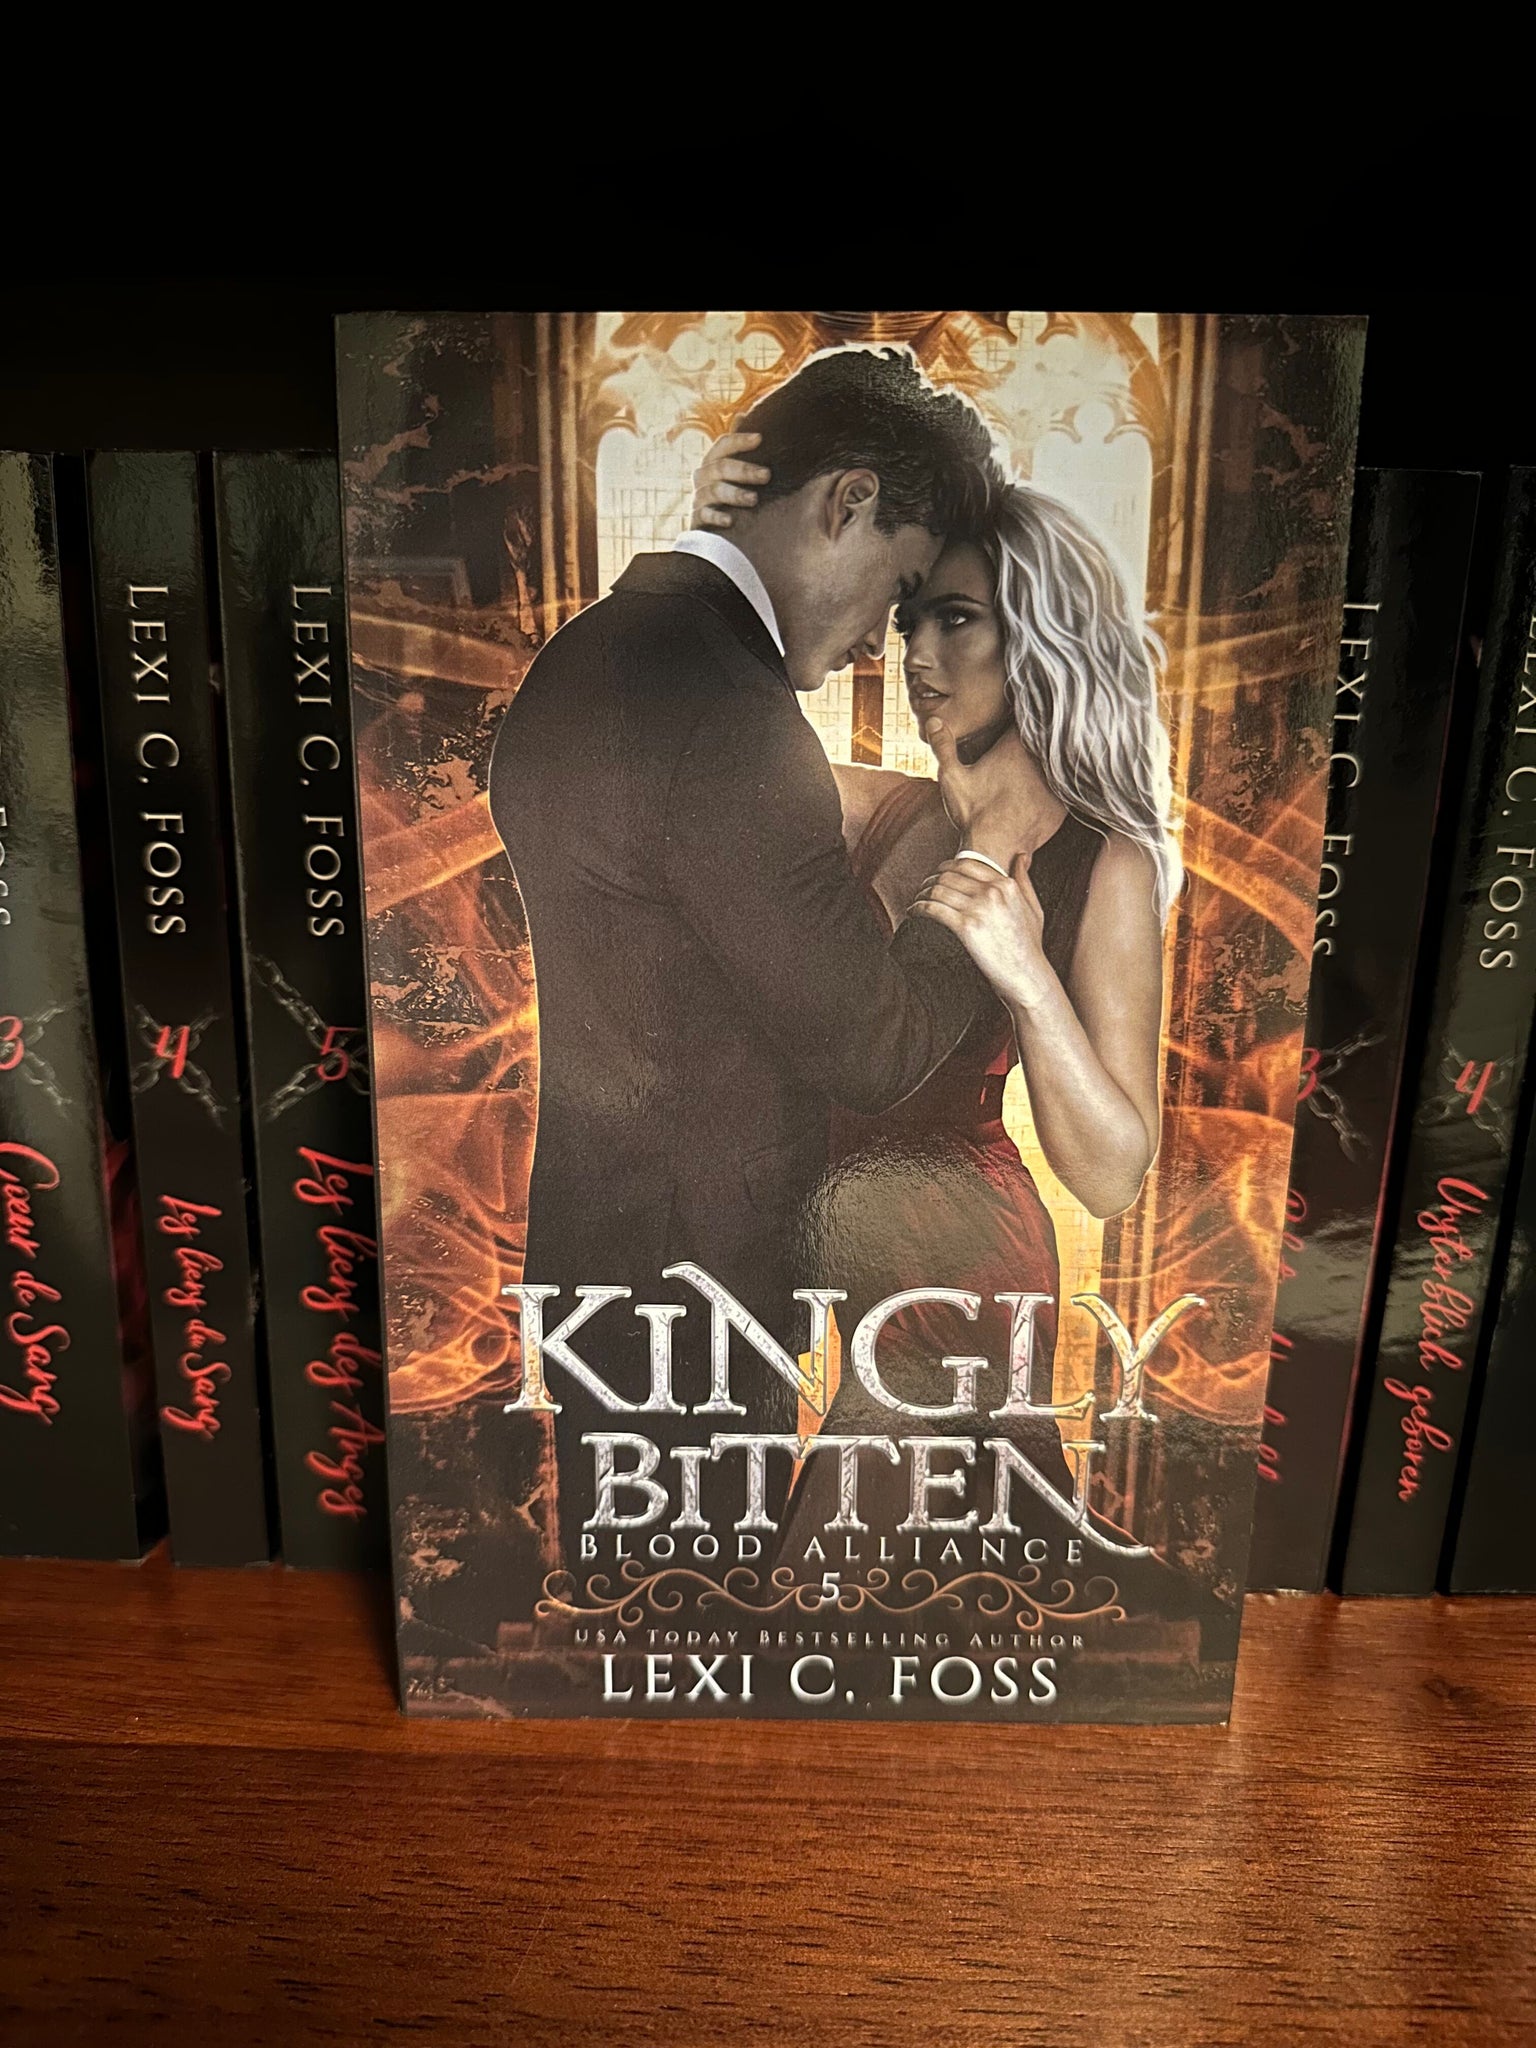 Kingly Bitten- Special Edition Paperback (Blood Alliance: Book 5)